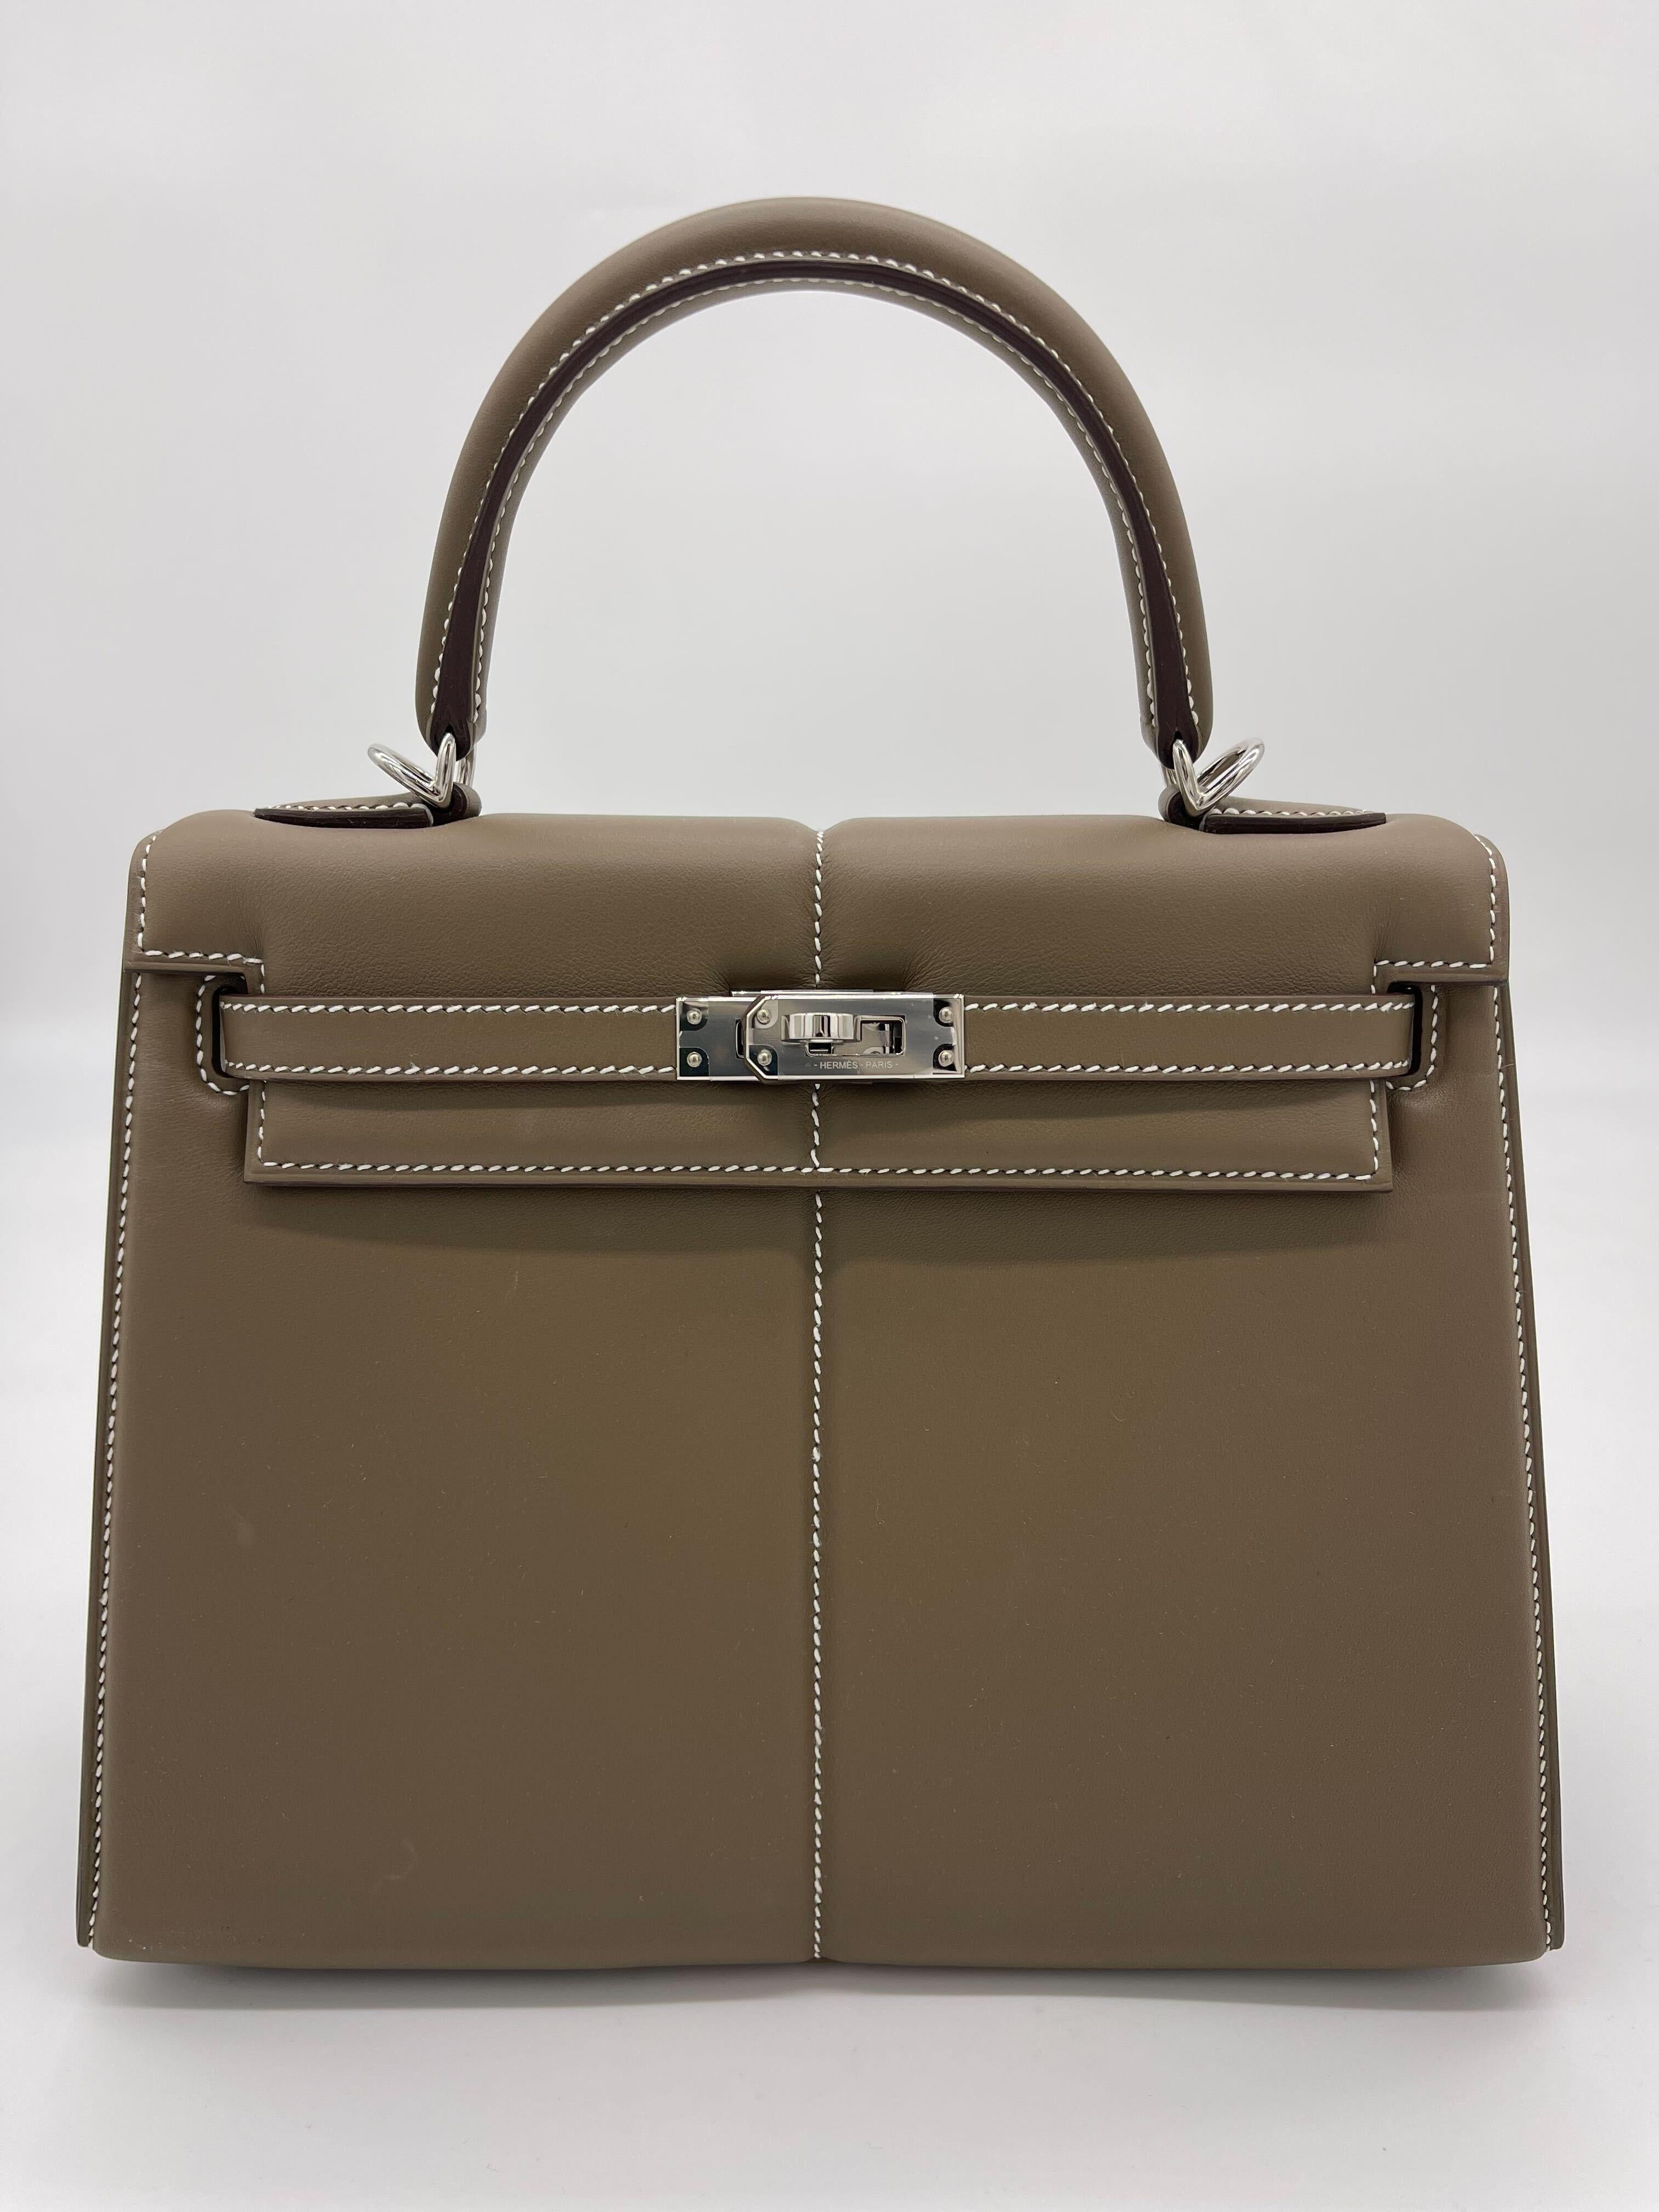 Hermes Kelly 25 Etoupe Swift Padded Palladium Hardware In Excellent Condition For Sale In New York, NY